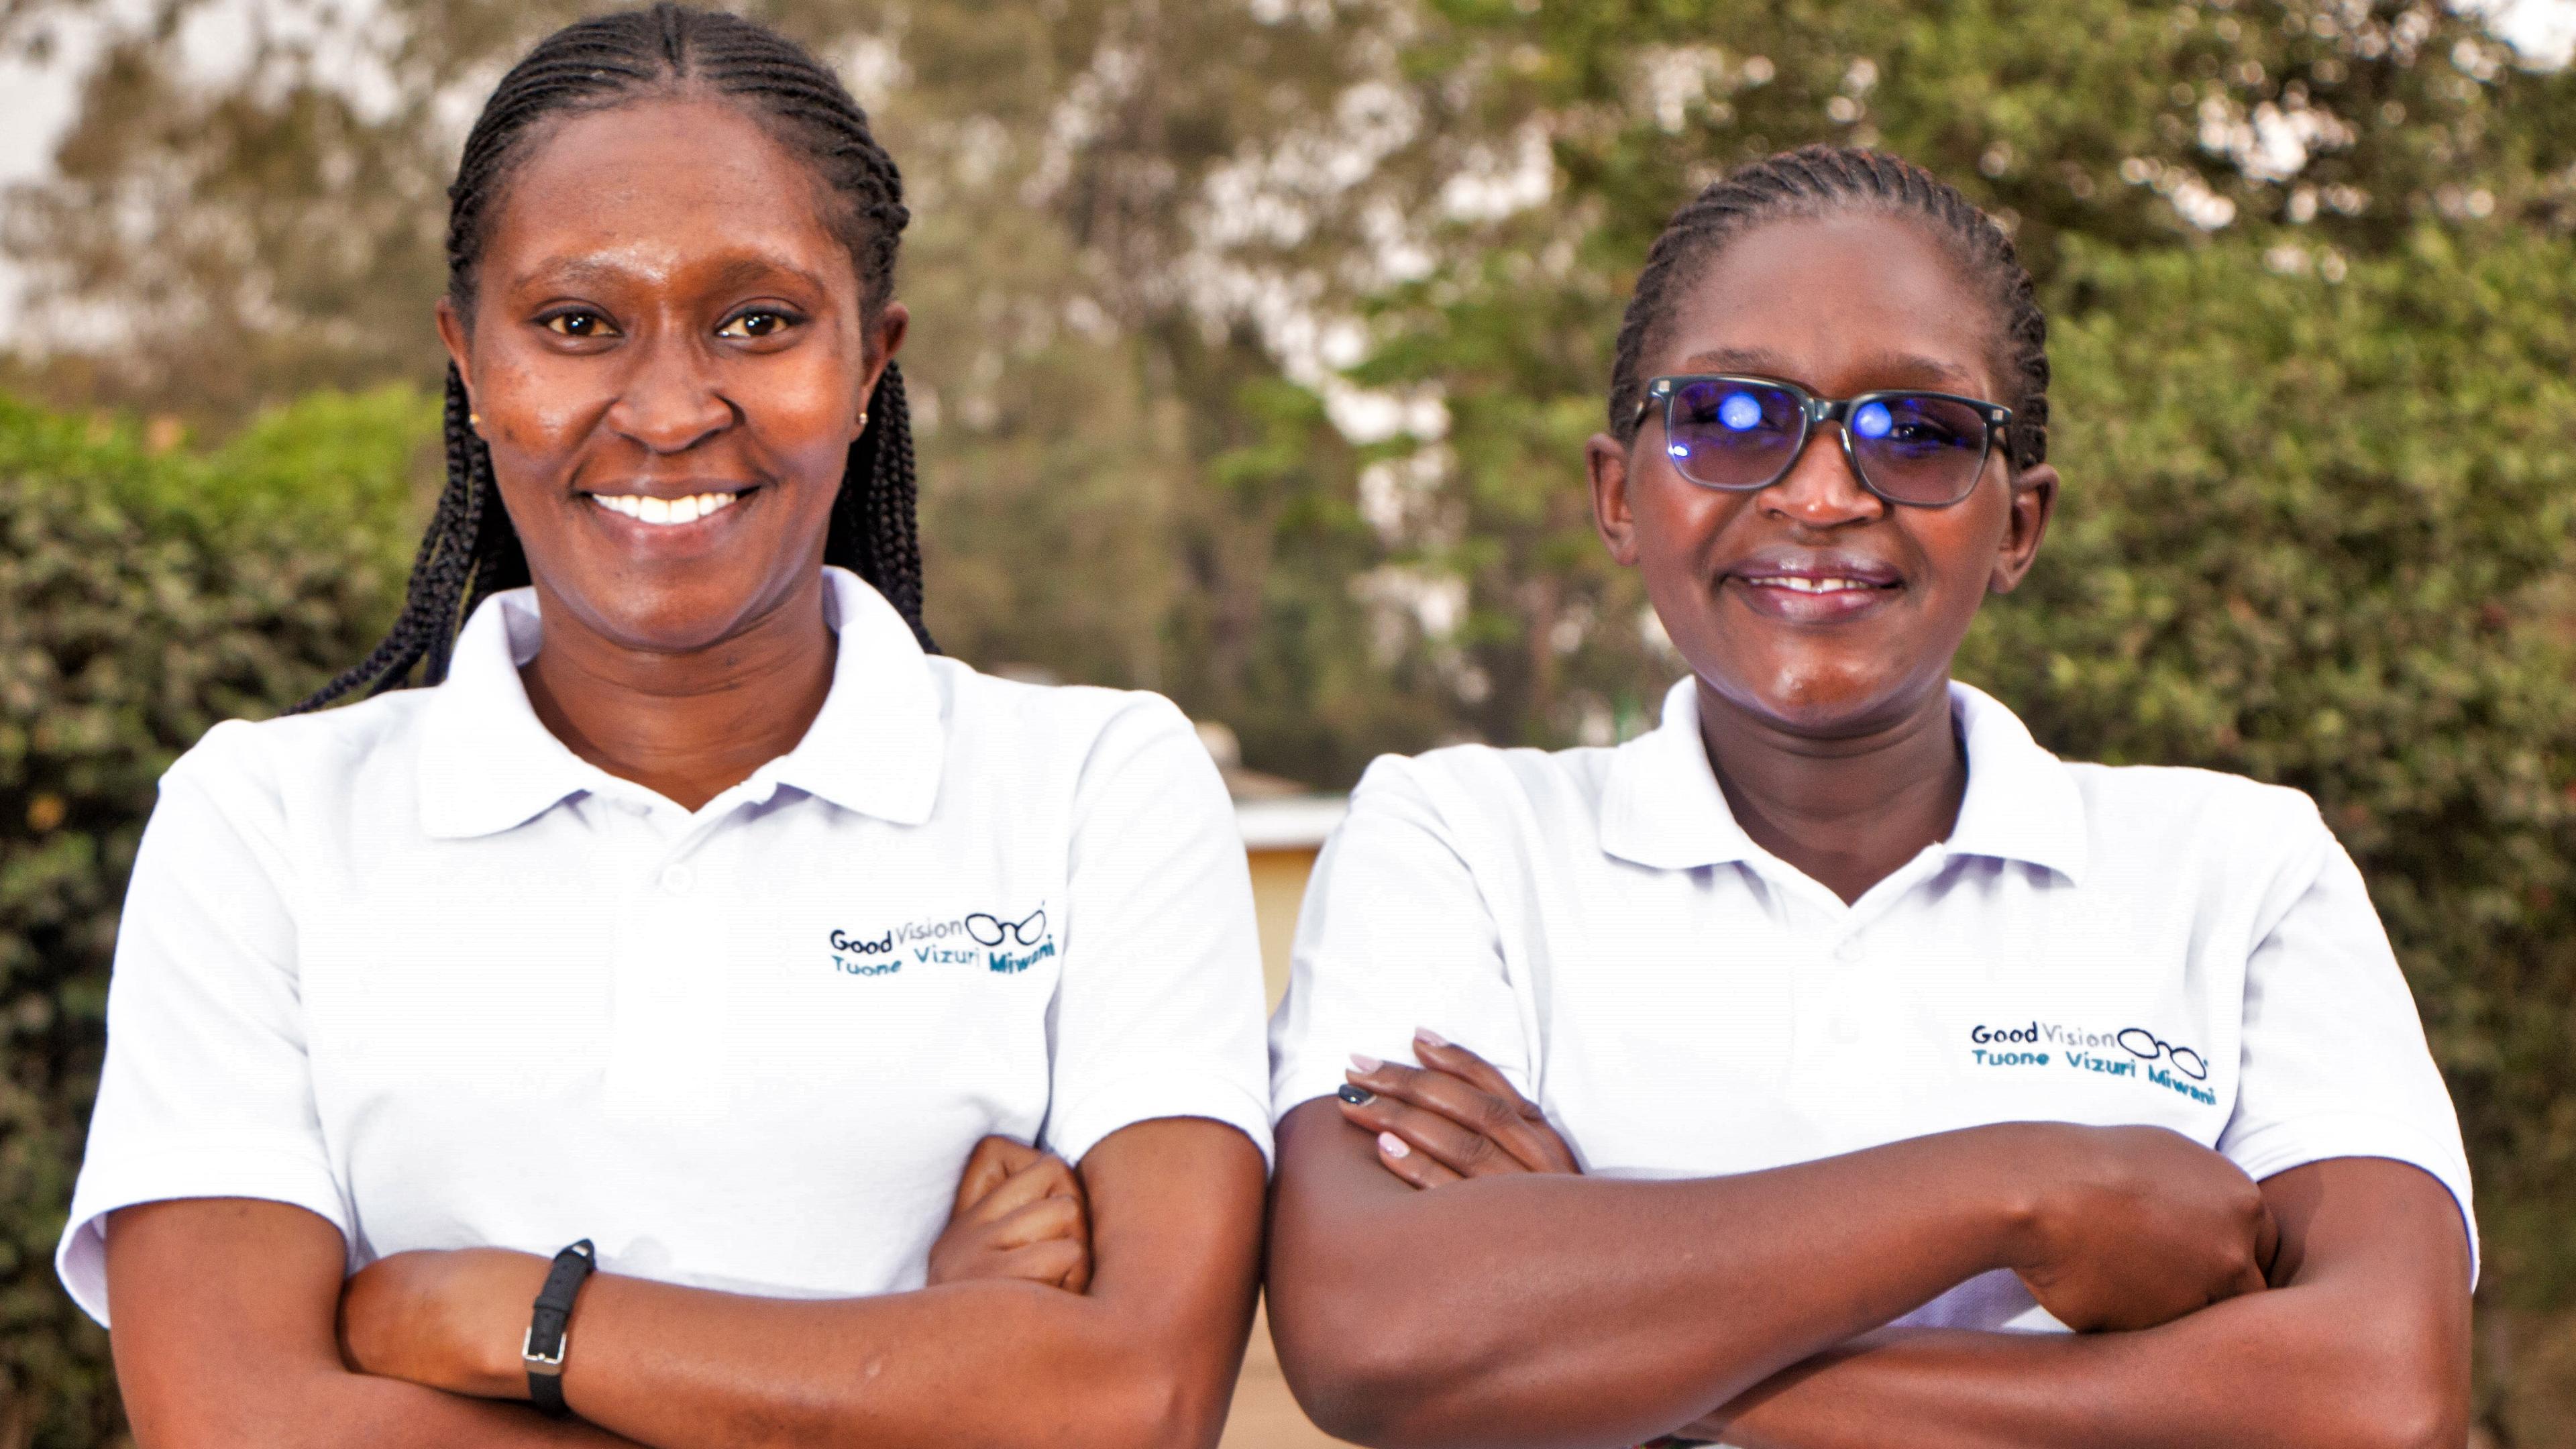 Two GoodVision employees in Kenya